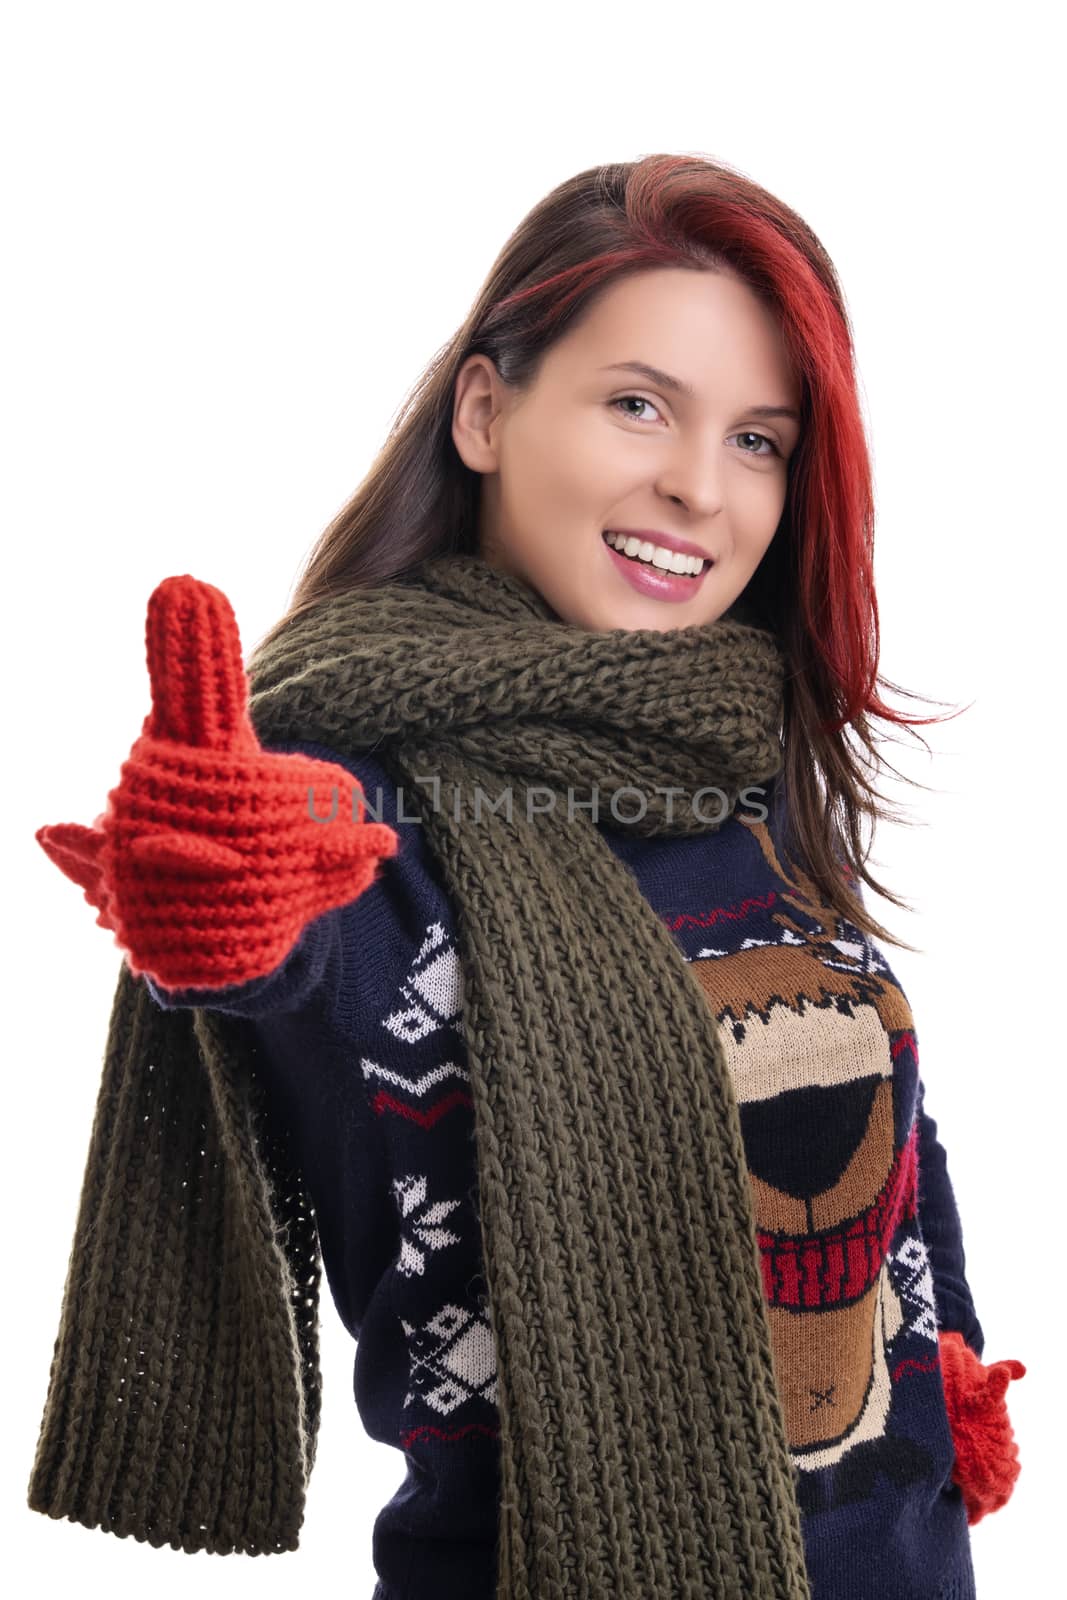 Smiling young girl in warm winter clothes giving thumbs up by Mendelex